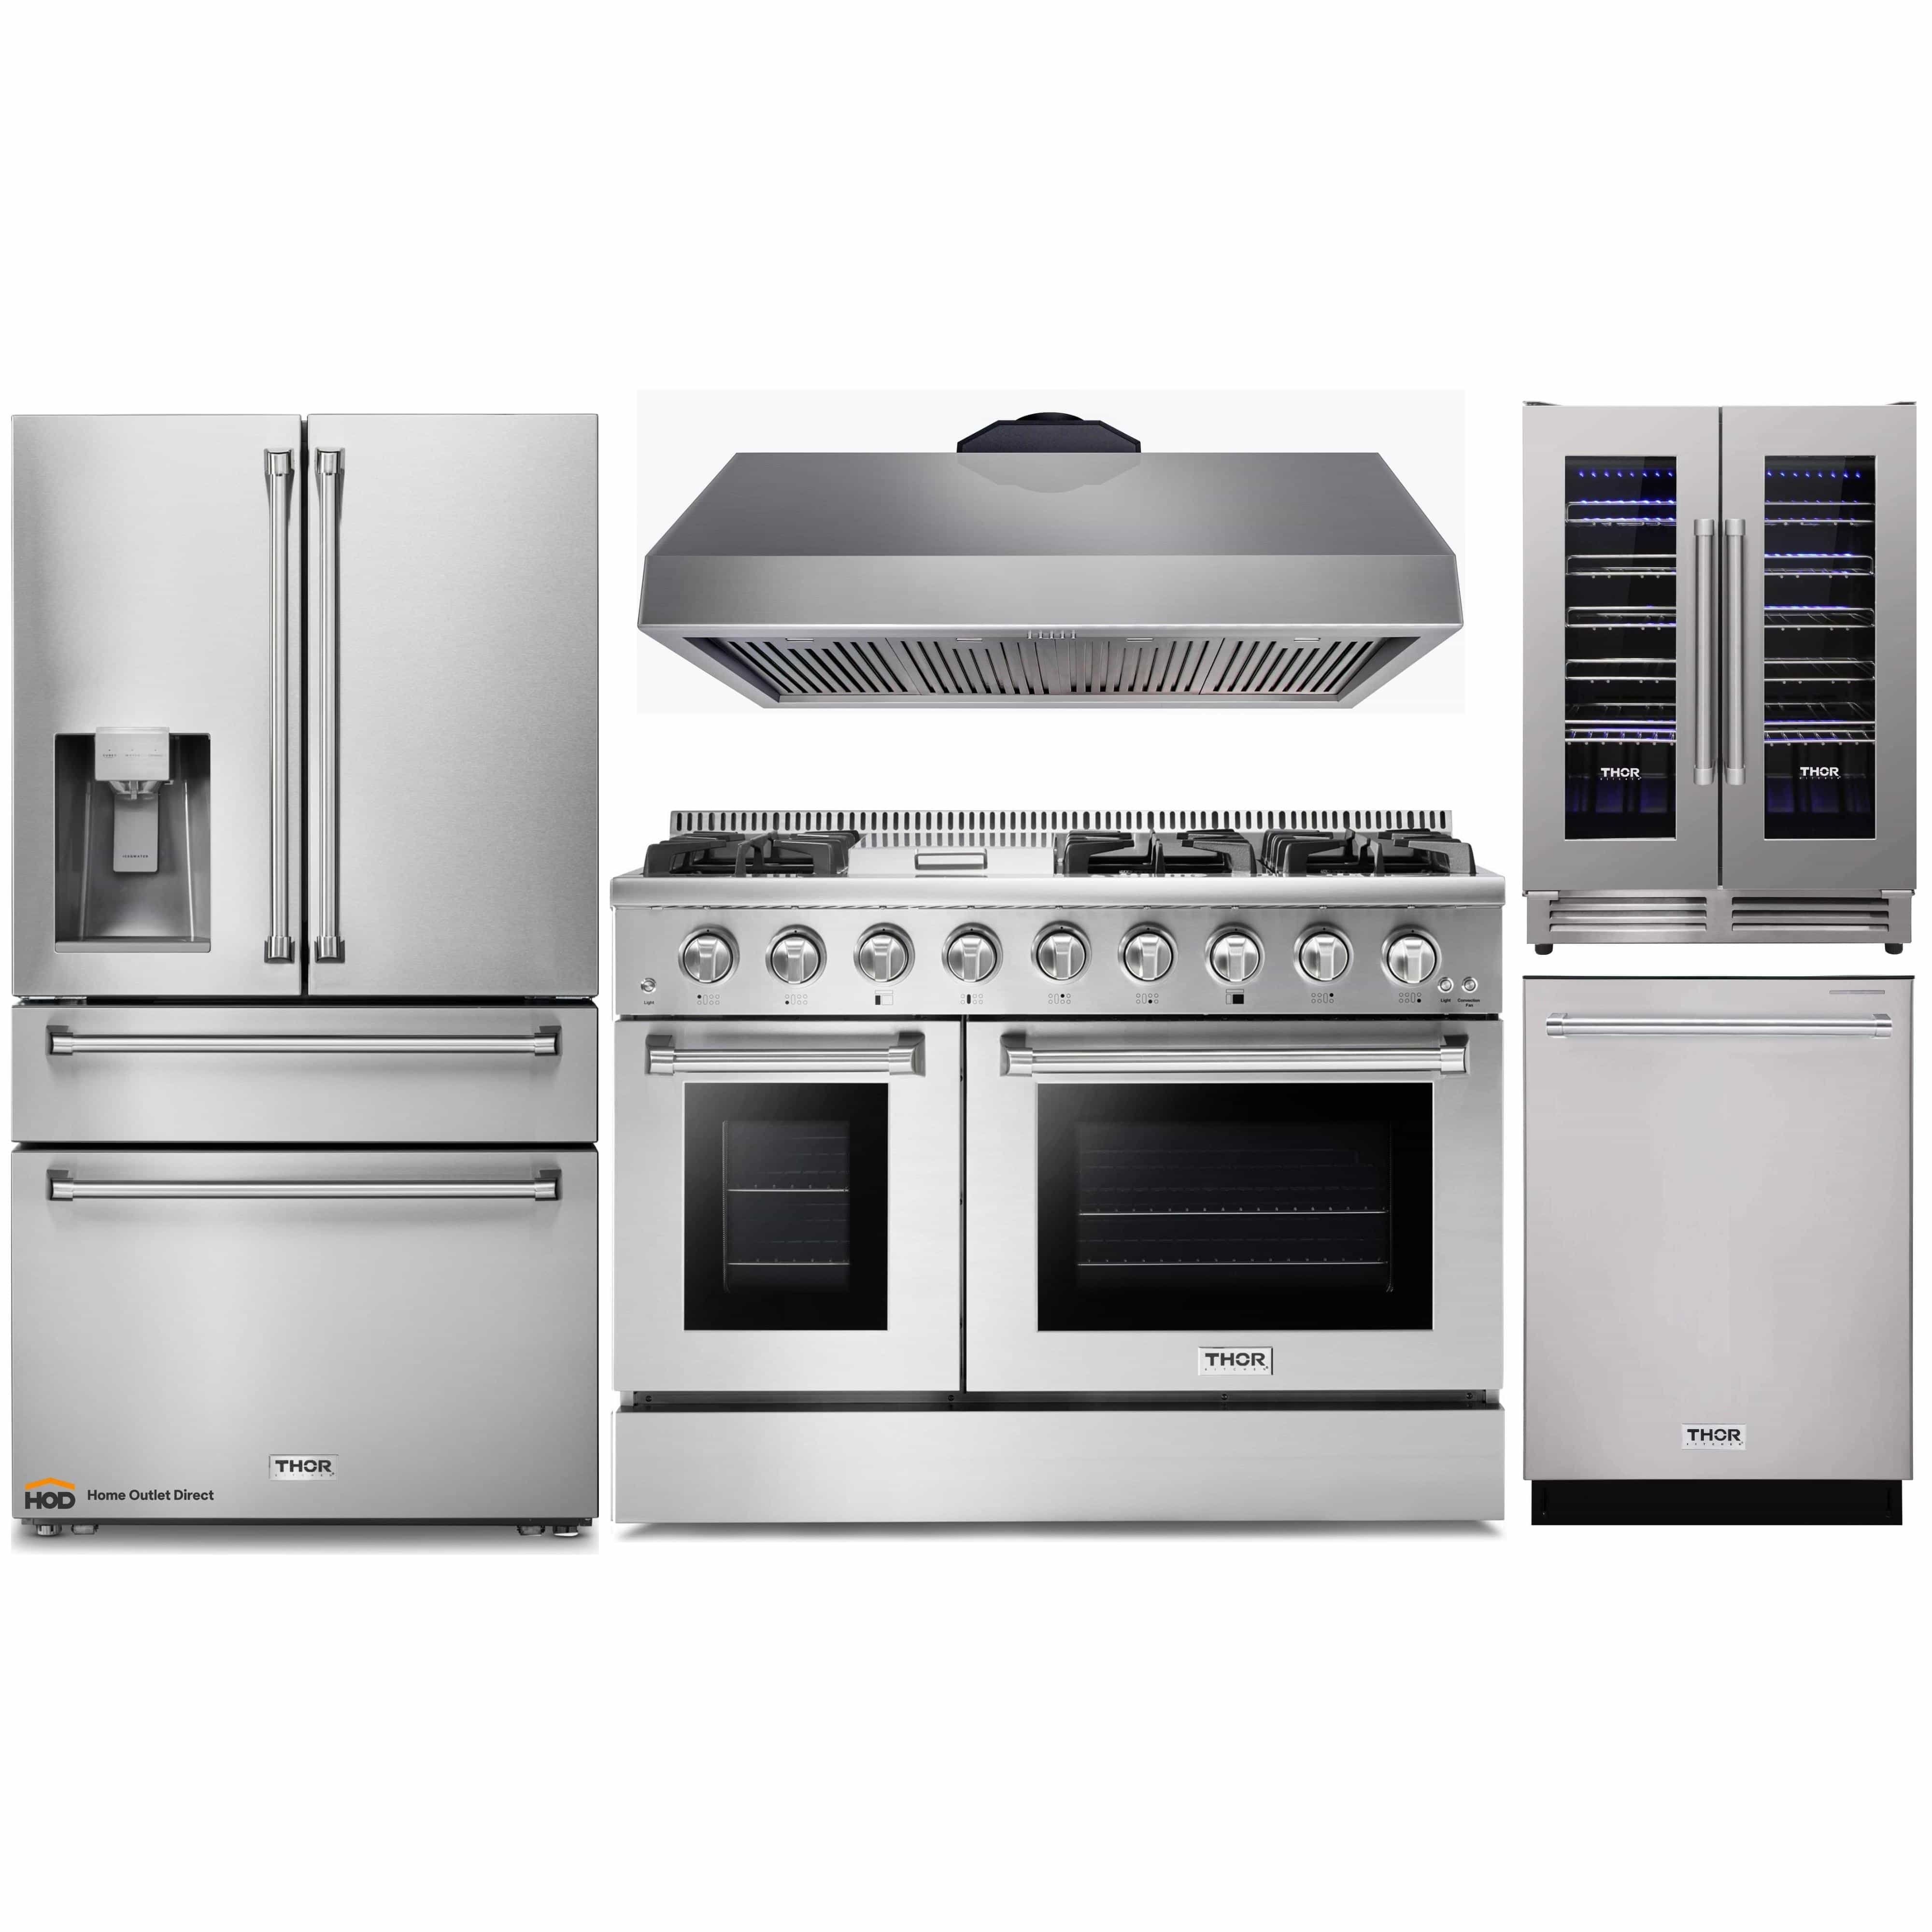 Thor Kitchen 5-Piece Pro Appliance Package - 48-Inch Gas Range, Under Cabinet 16.5-Inch Tall Hood, Refrigerator with Water Dispenser, Dishwasher, & Wine Cooler in Stainless Steel